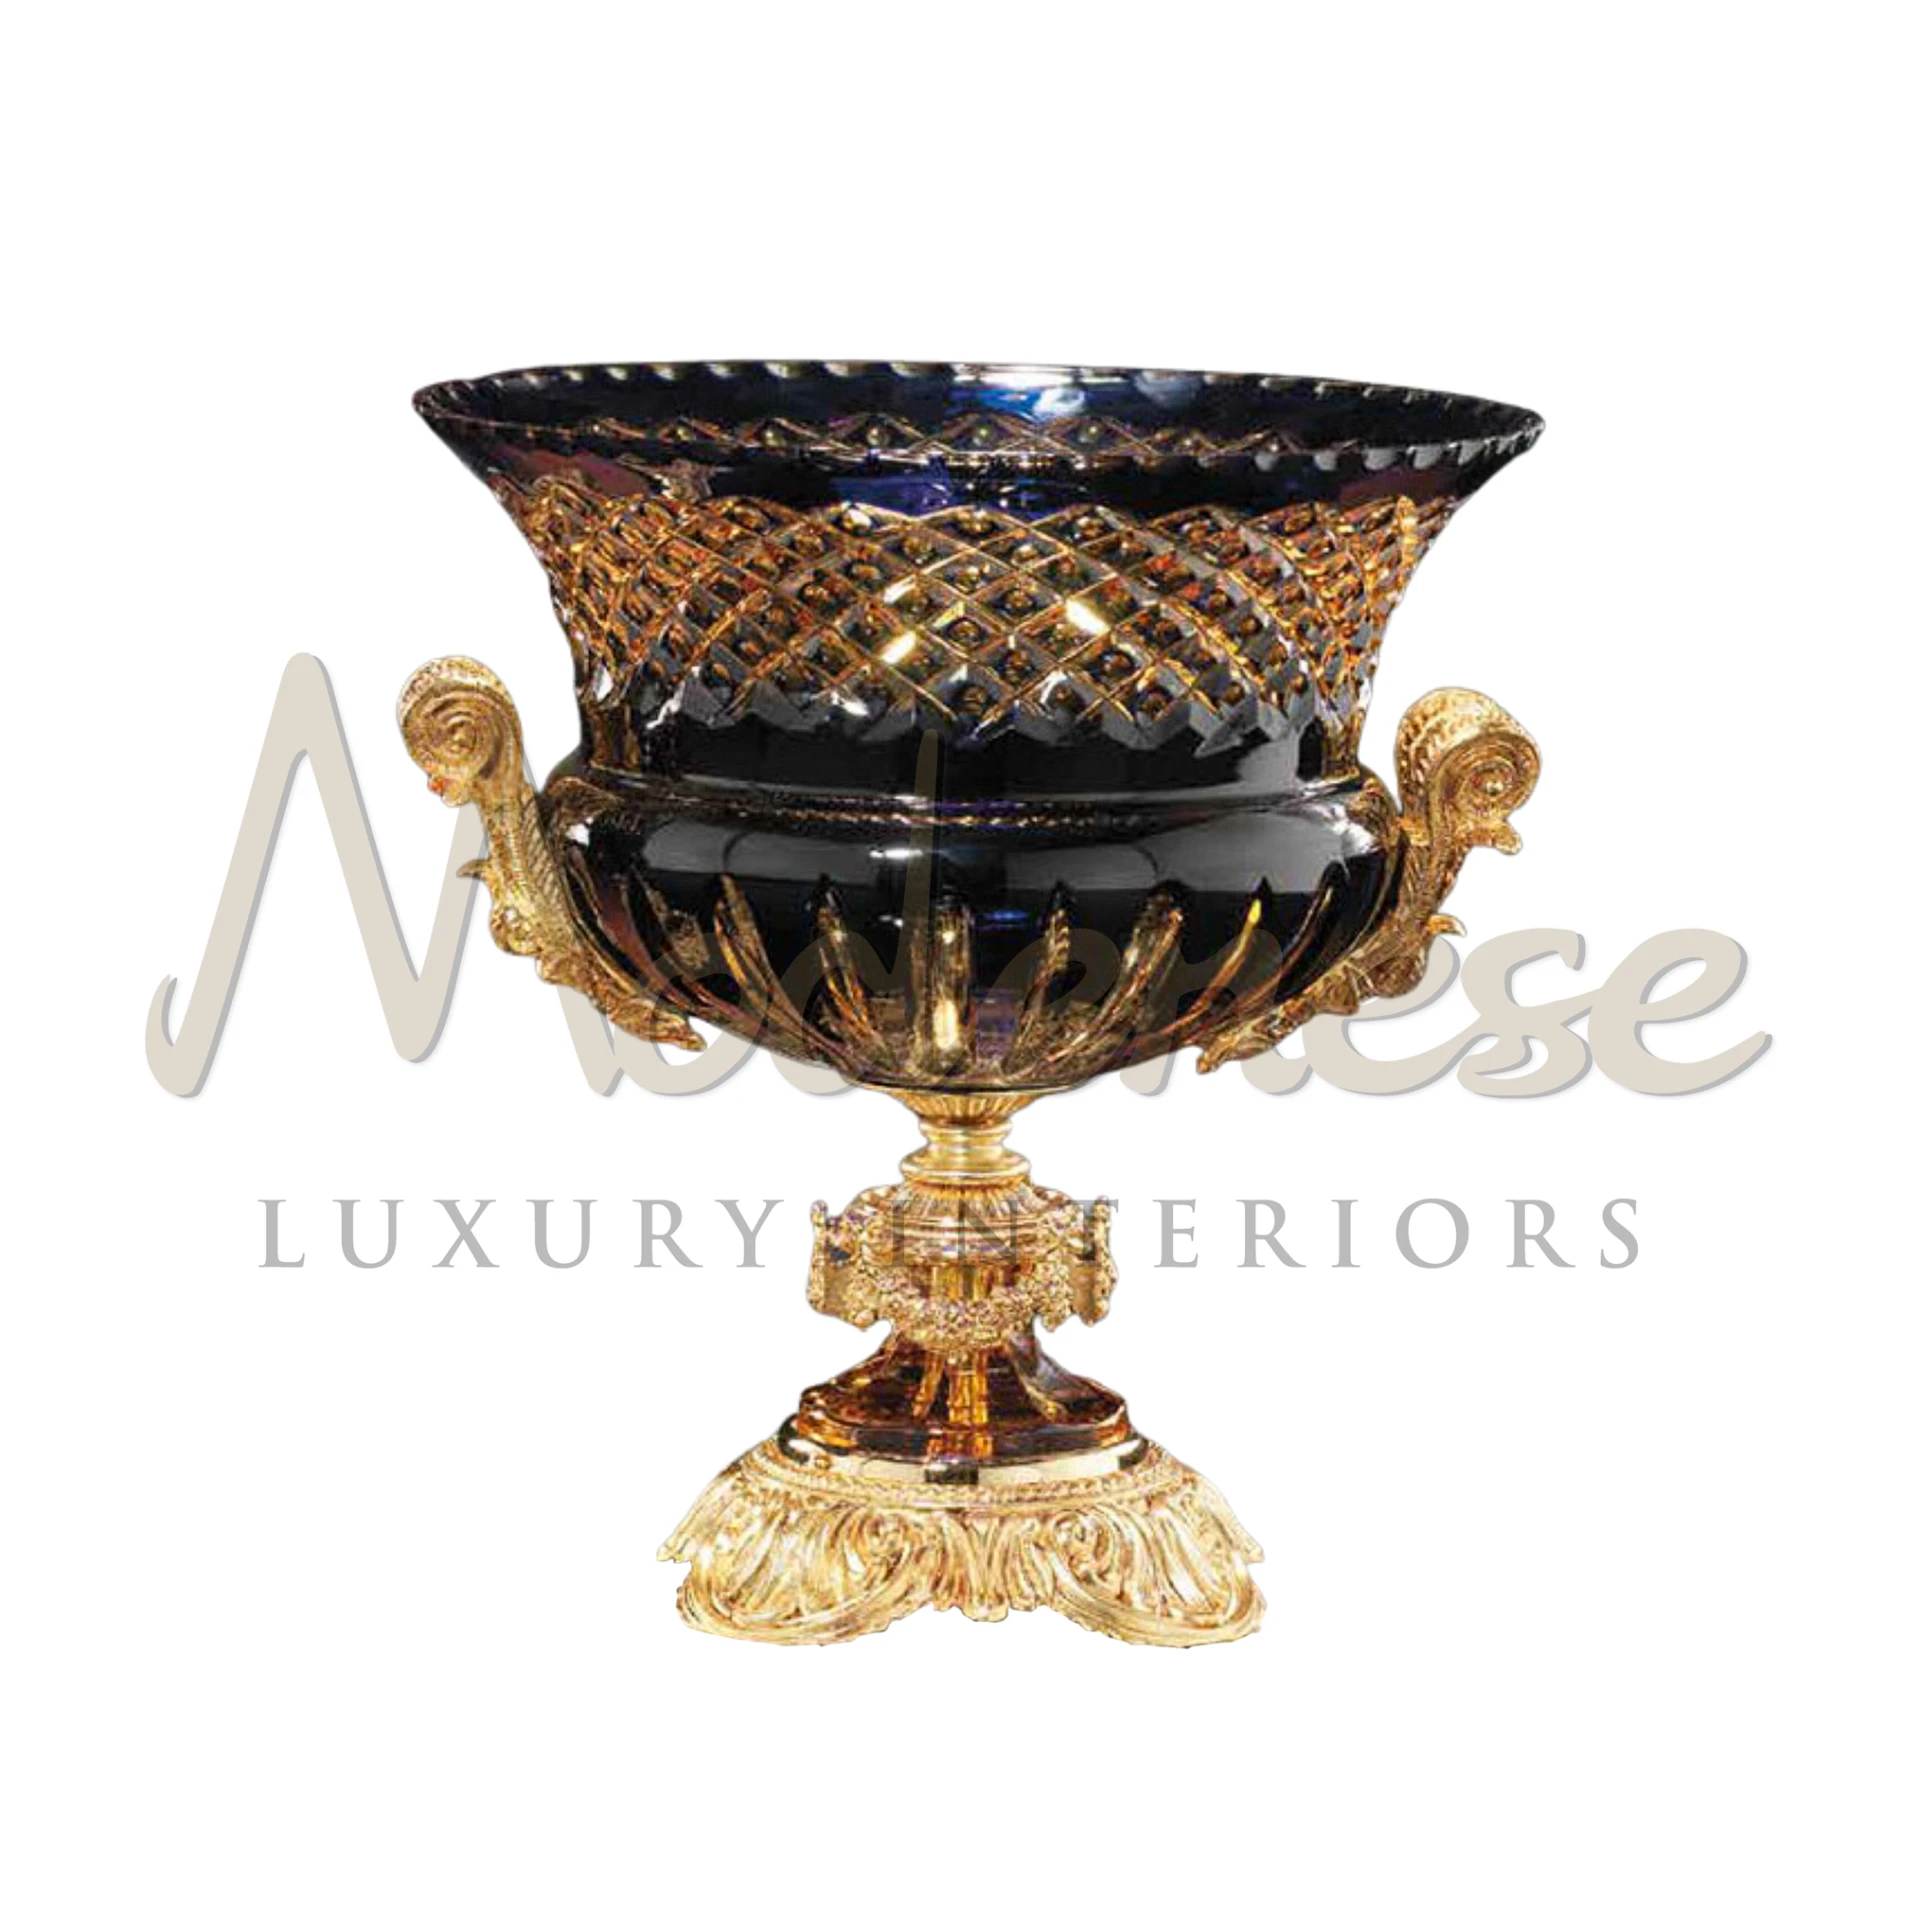 Traditional Black Glass Bowl, classic and timeless design, versatile for luxury and sophisticated interior settings.